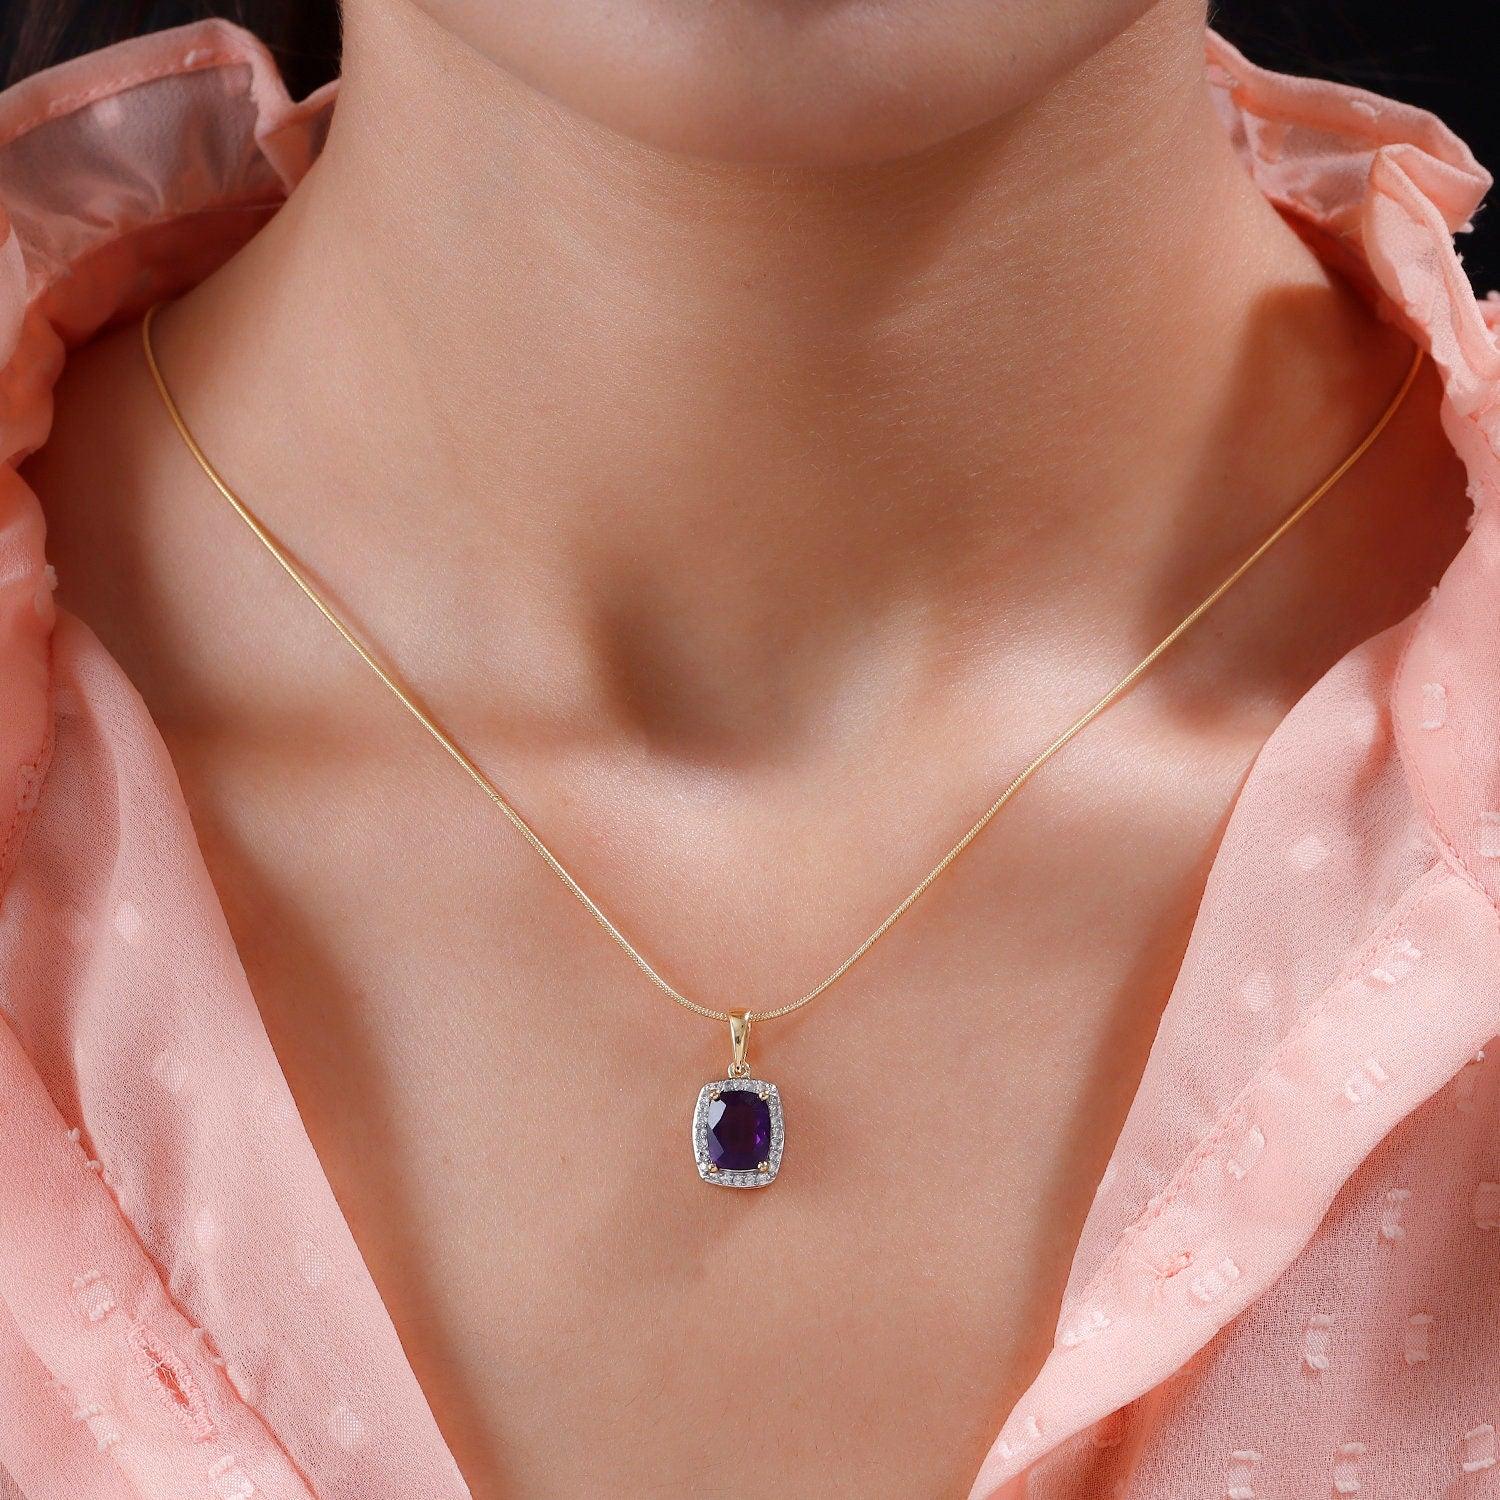 Amethyst Pendant Necklace, Amethyst Halo Pendant, February Birthstone Necklace, 925 Sterling Silver, Amethyst Gold Necklace, Gift for her - Inspiring Jewellery